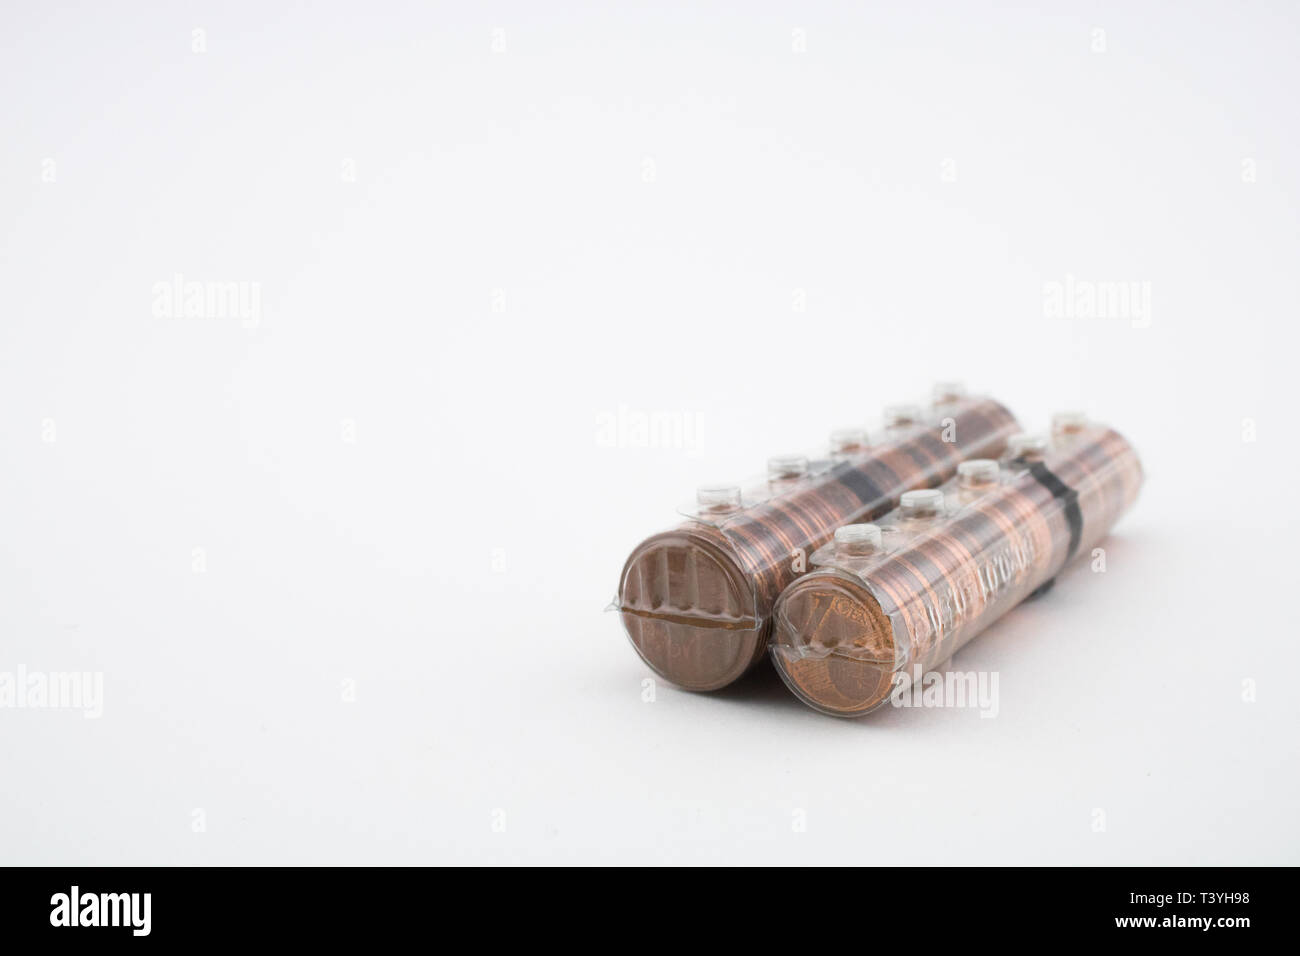 Rolls with coins of five euro cents and one euro cents isolated on white background. Rolls with euros. Savings of coins to enter the bank. Stock Photo